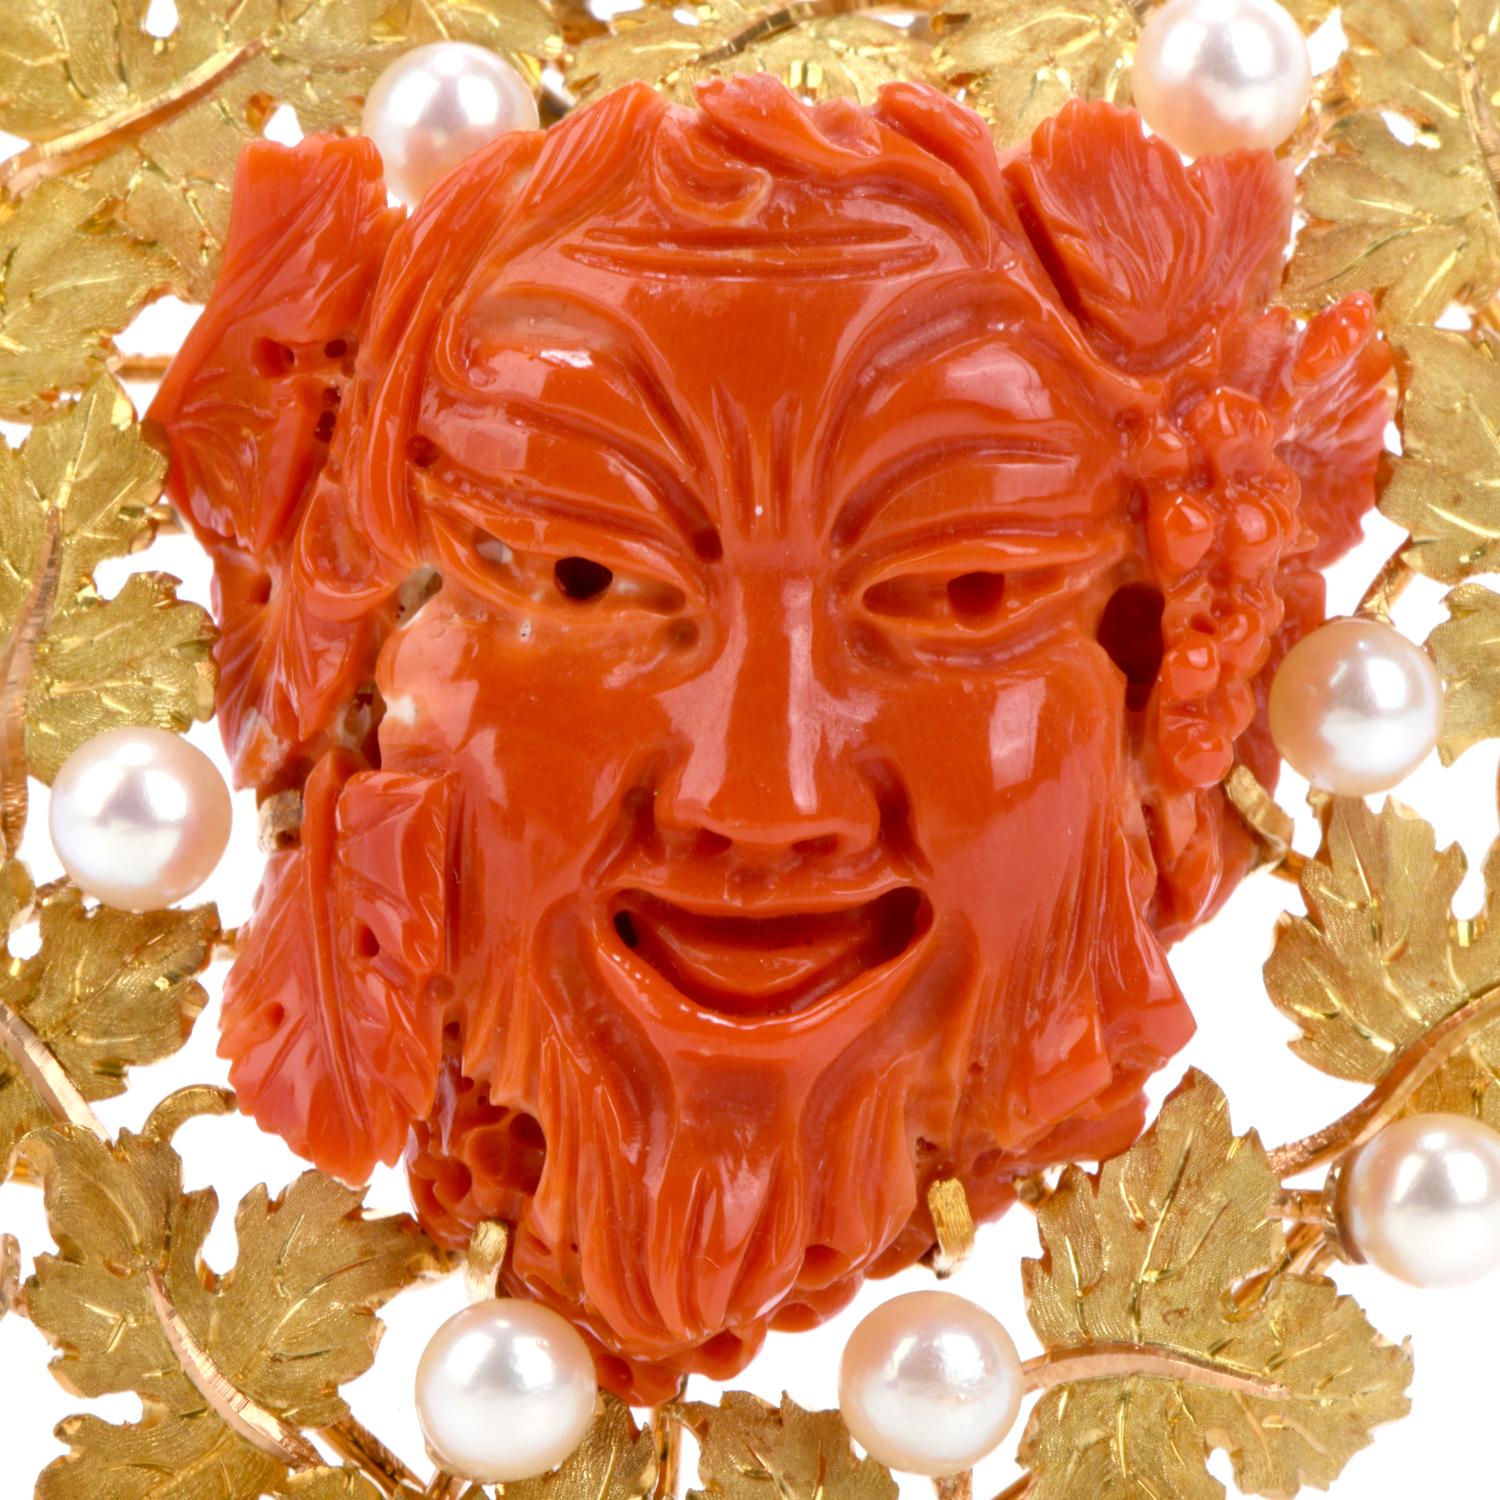 Acquire this rare Buccellati brooch and convertible pendant to make two valiant statements in your collection. 

Bacchus is the beloved Roman God of agriculture, wine, and fertility. 

The bright natural red coral centerpiece is surrounded by a